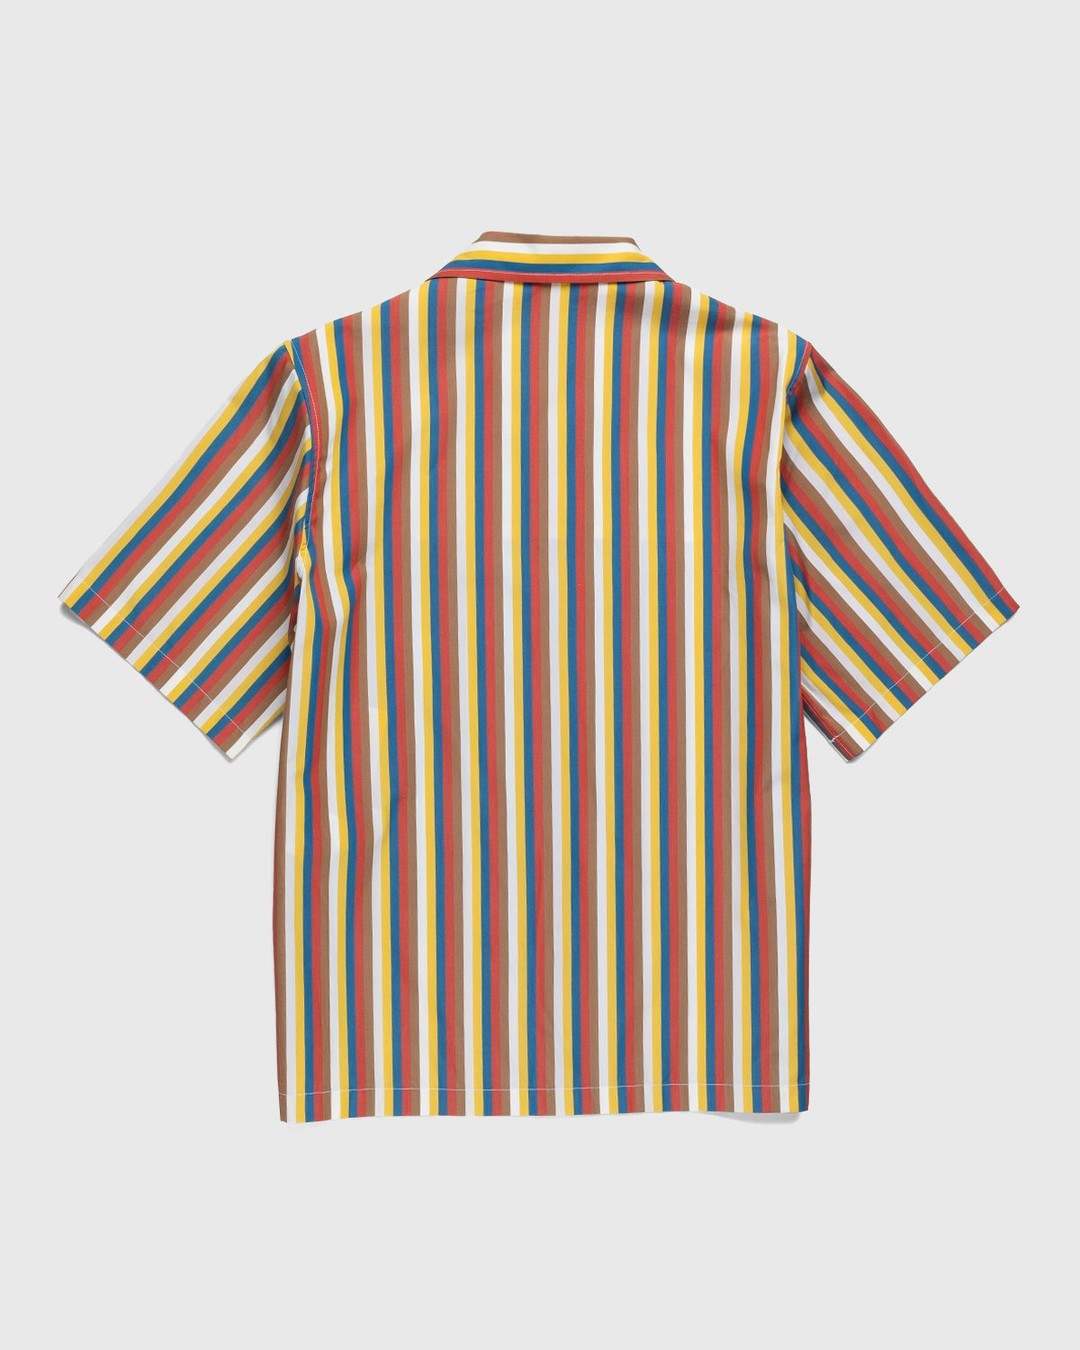 Jil Sander – Striped Vacation Shirt Red/White - Shirts - Red - Image 2